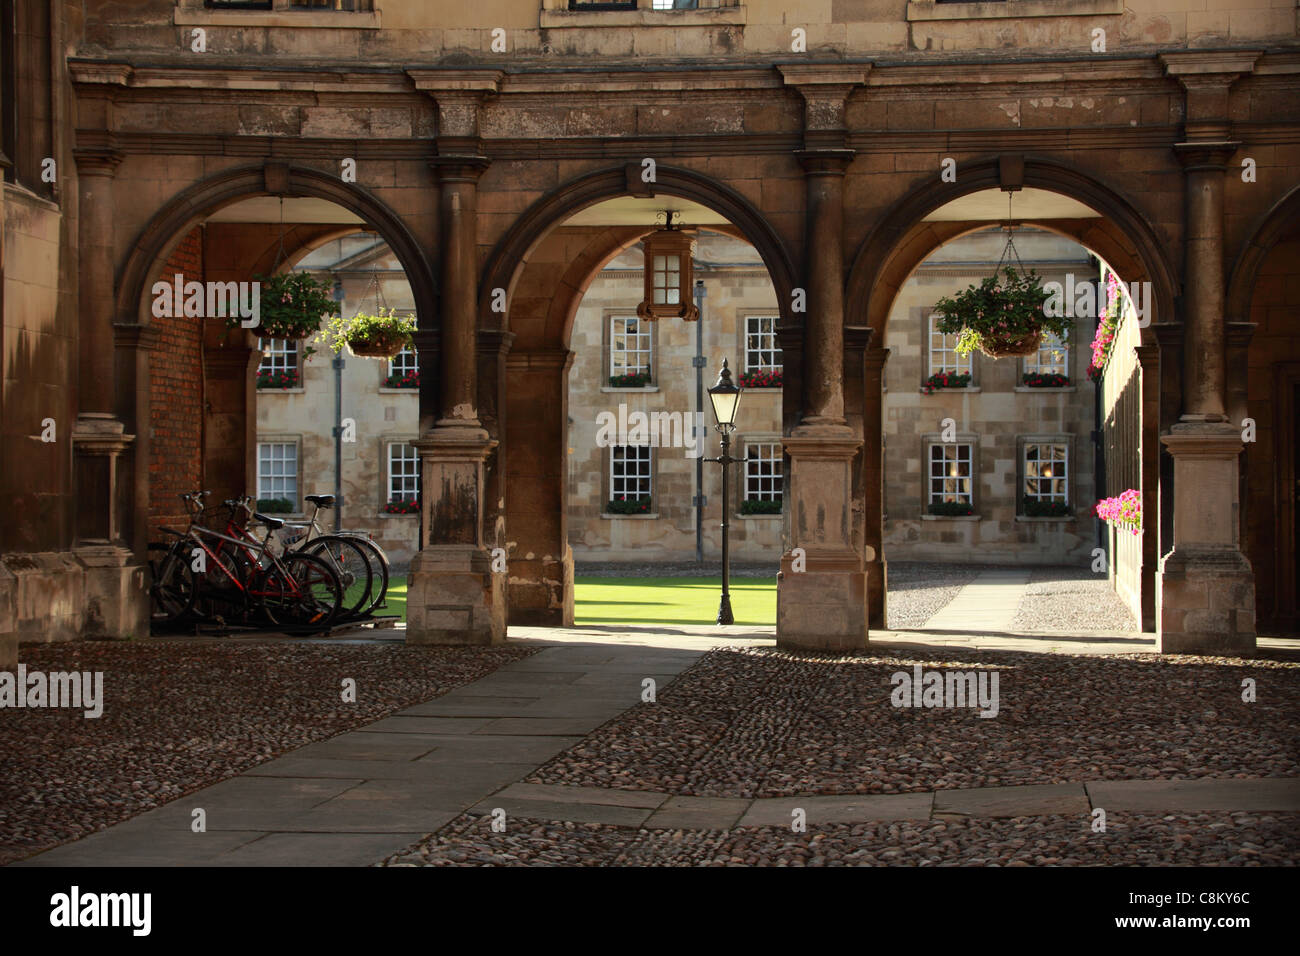 Archways to a college entrance Cambridge UK Stock Photo